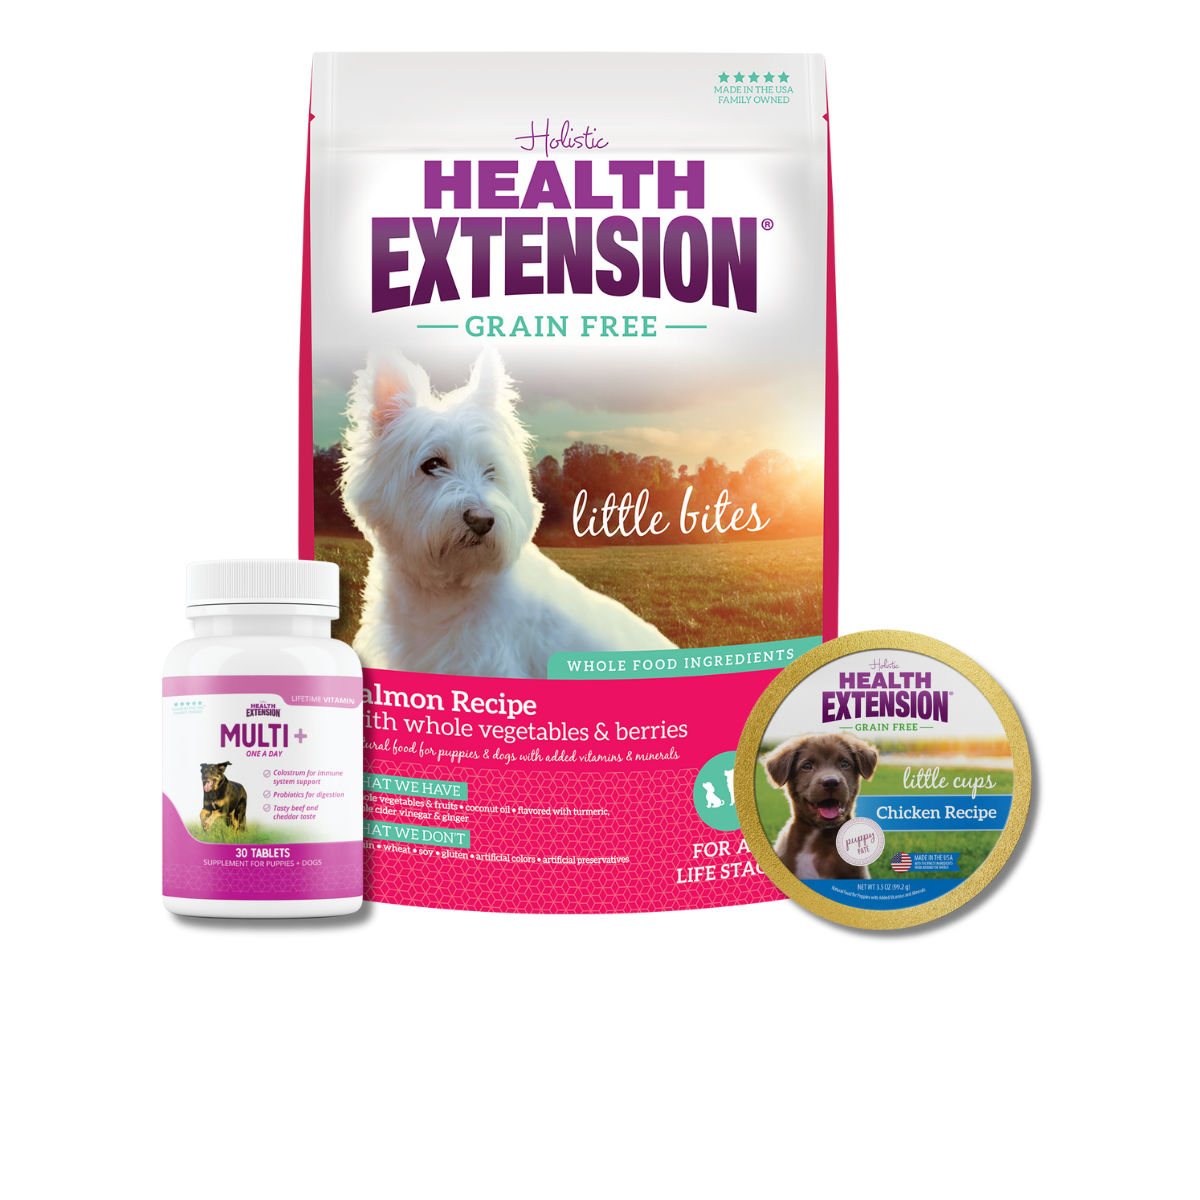 Puppy Trial Bundle for Small Breed: Bag of Health Extension Grain Free Salmon Little Bites,  a bottle of Health Extension Multi+ vitamins for puppies and dogs, Grain Free Little Cups for Small Breeds